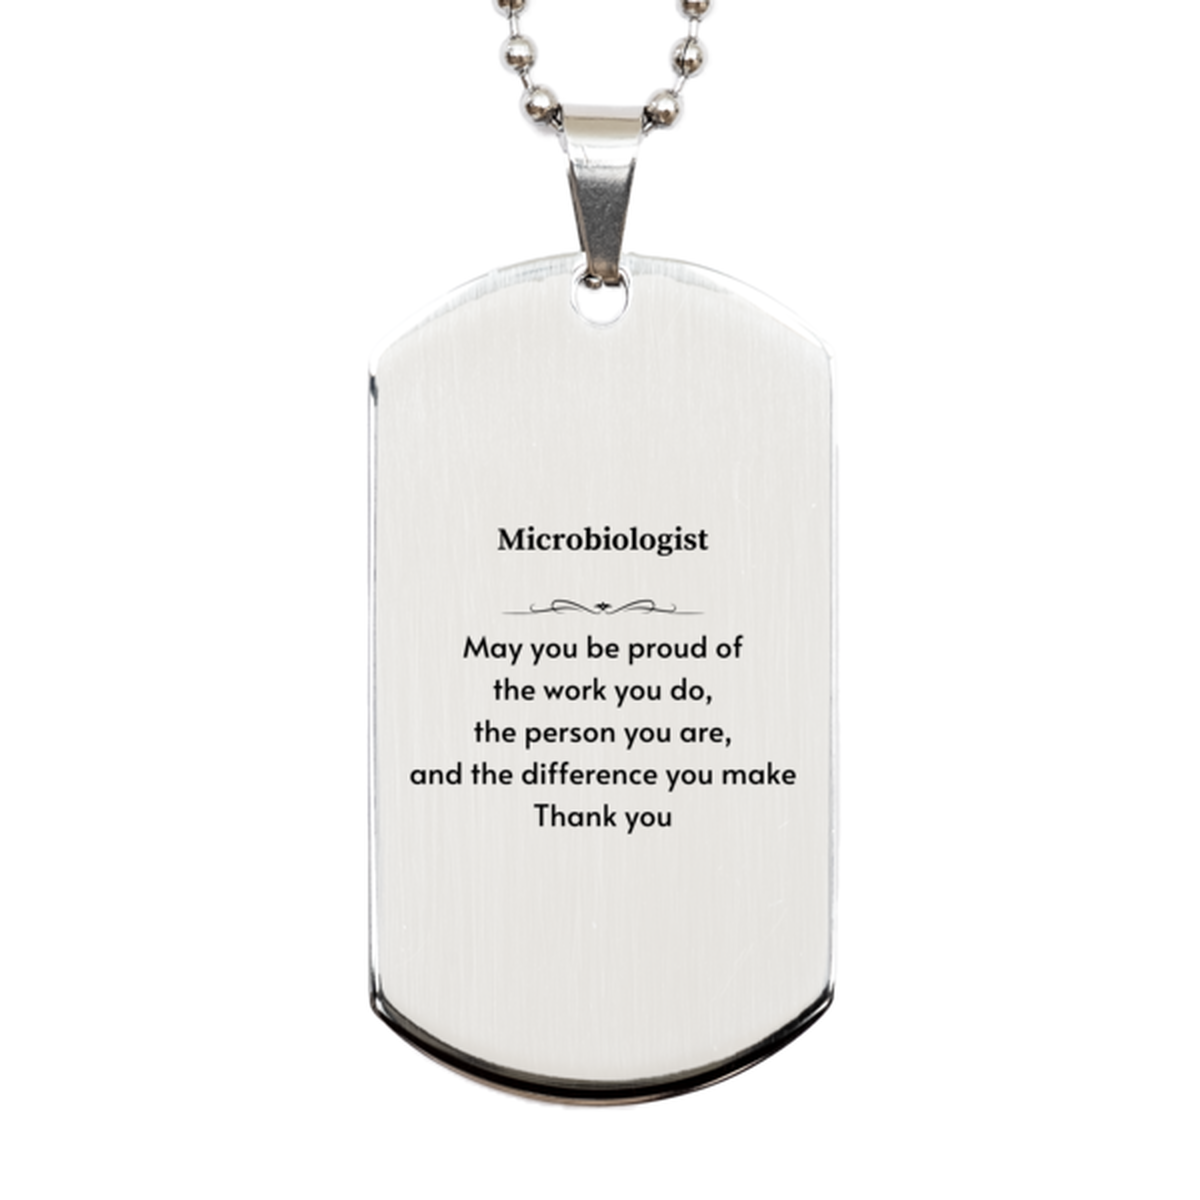 Heartwarming Silver Dog Tag Retirement Coworkers Gifts for Microbiologist, Microbiologist May You be proud of the work you do, the person you are Gifts for Boss Men Women Friends